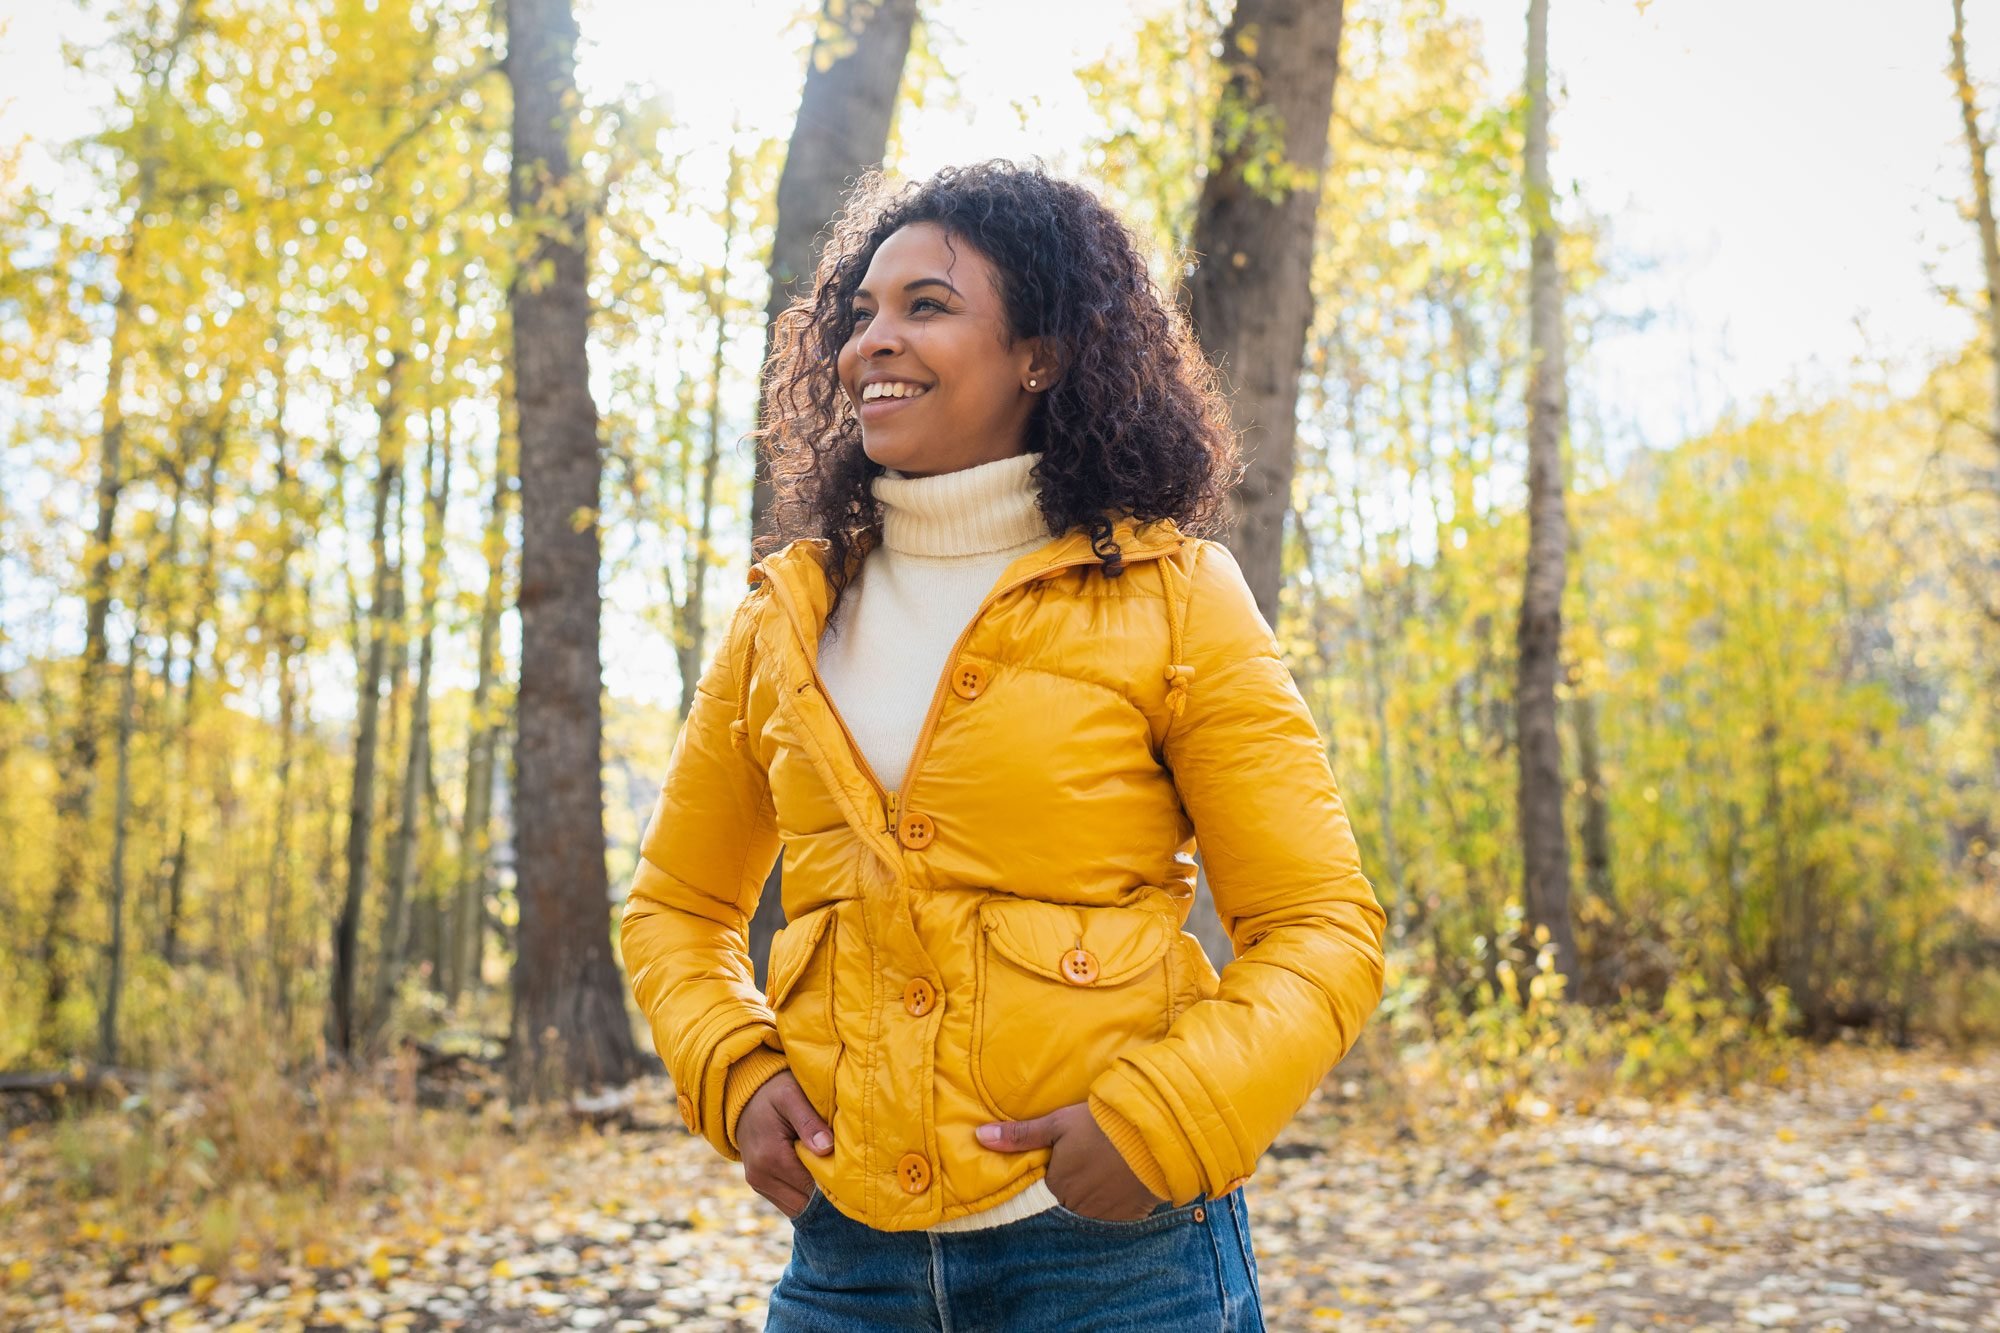 https://www.rd.com/wp-content/uploads/2023/07/smiling-woman-in-autumn-outdoors-GettyImages-1302154722.jpg?fit=700%2C1024